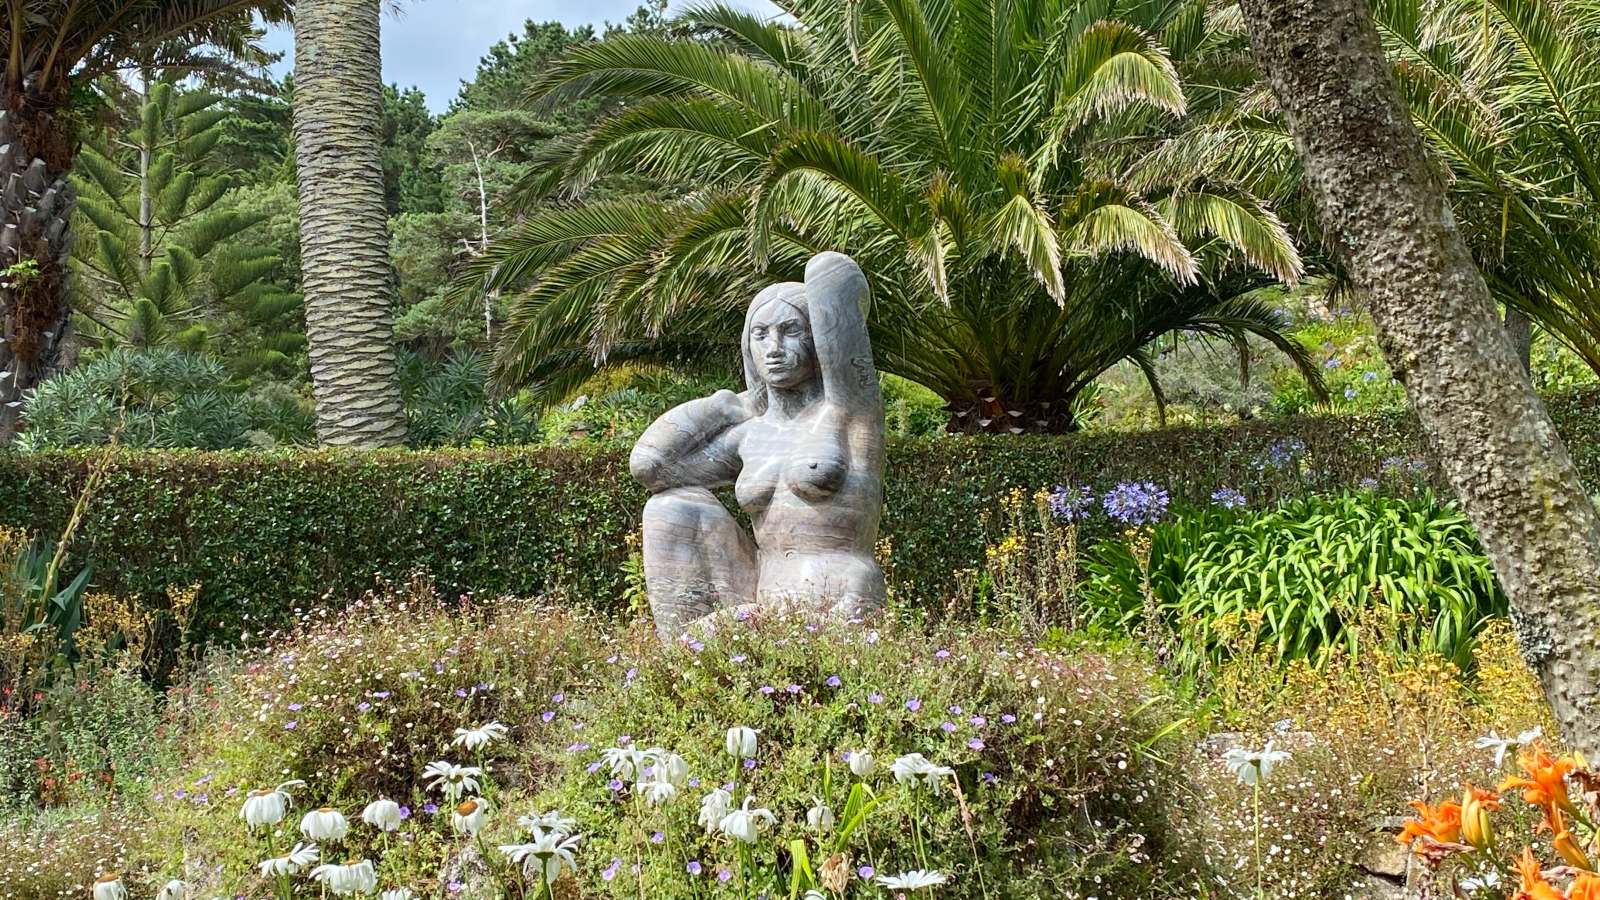 Statues and flowers in Abbey Gardens, Tresco